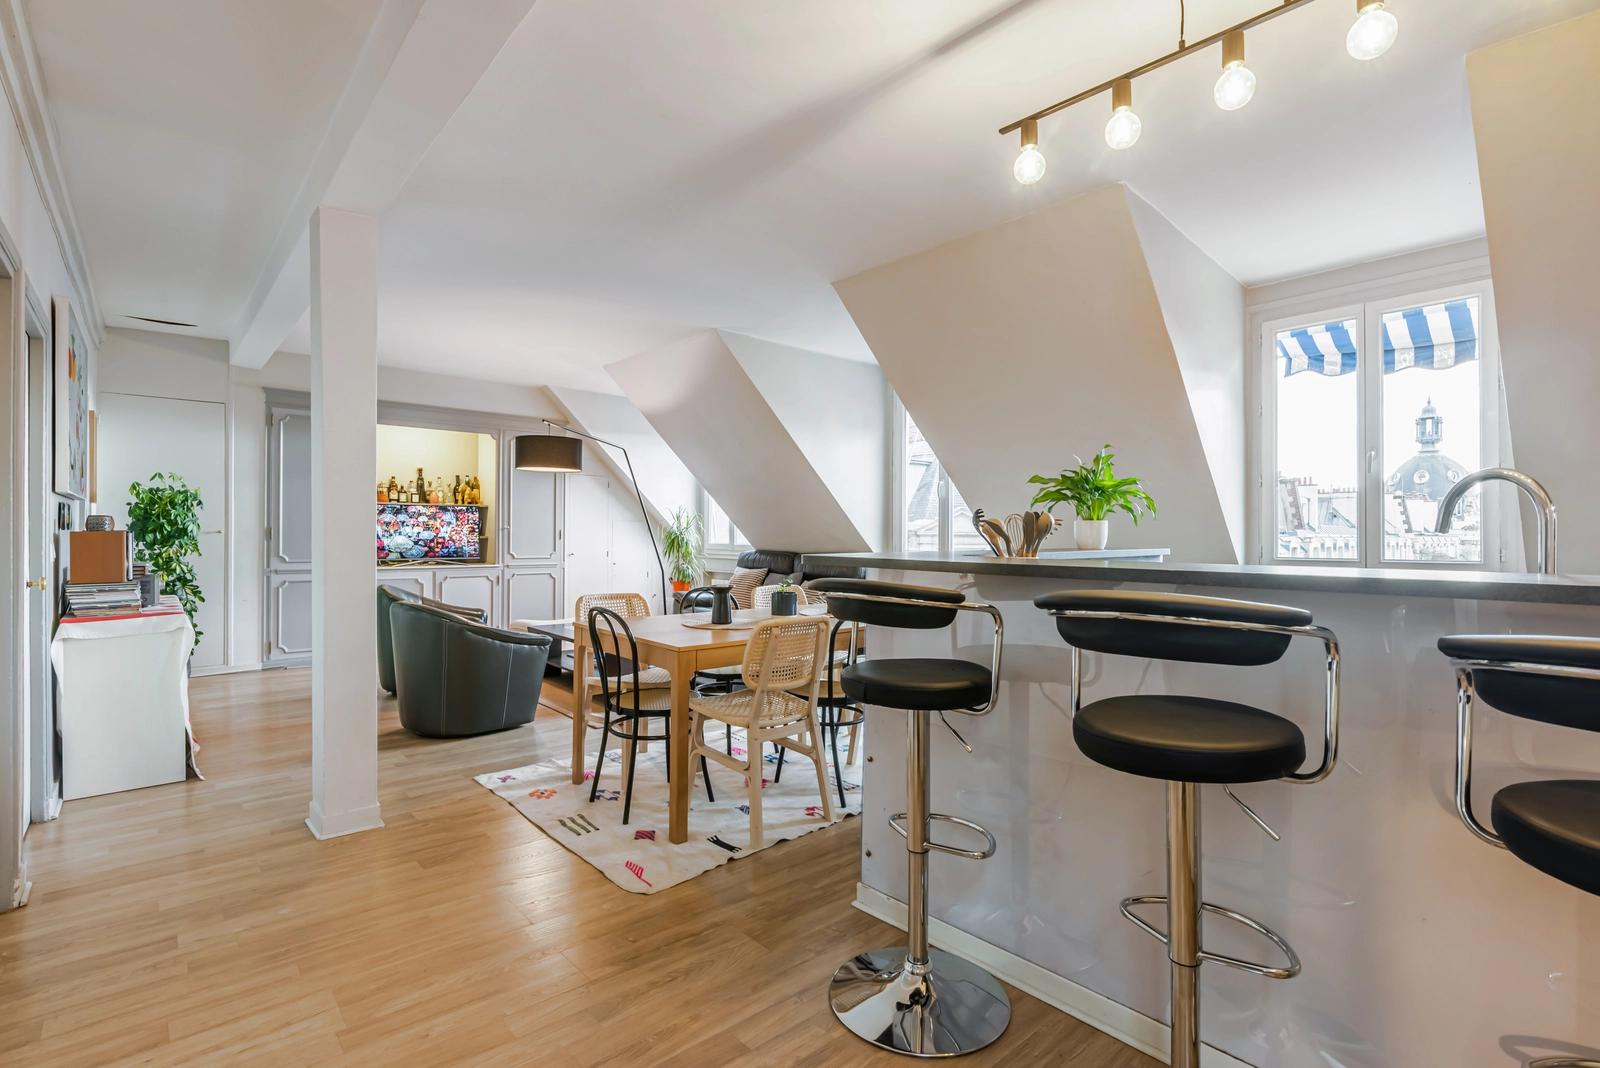 Space Bright, modern apartment in the heart of Paris - 0